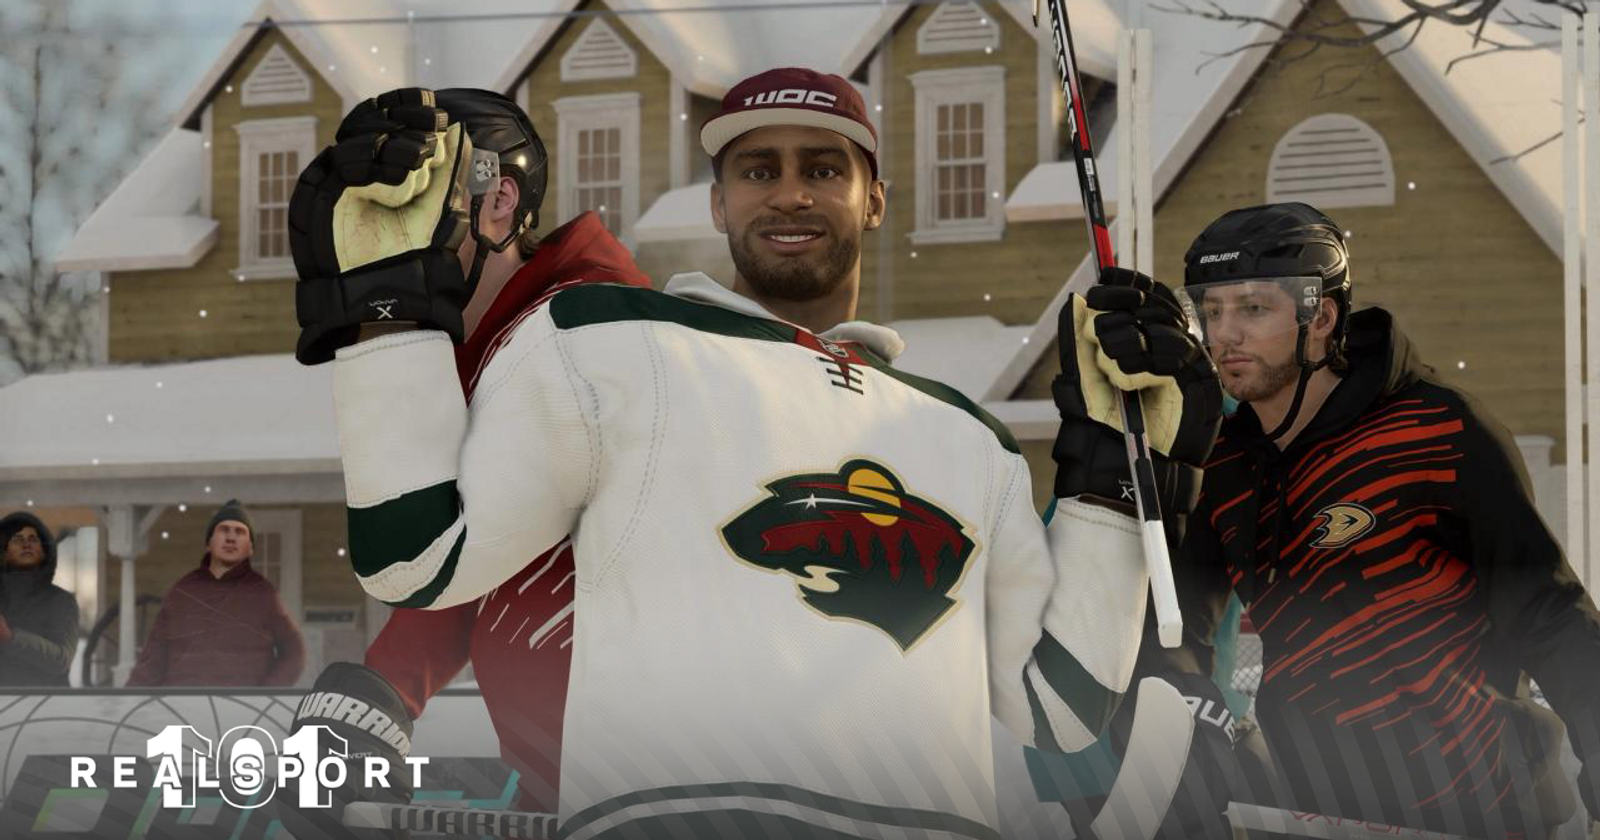 Here's my EASHL club's jerseys for the majority of the past 3